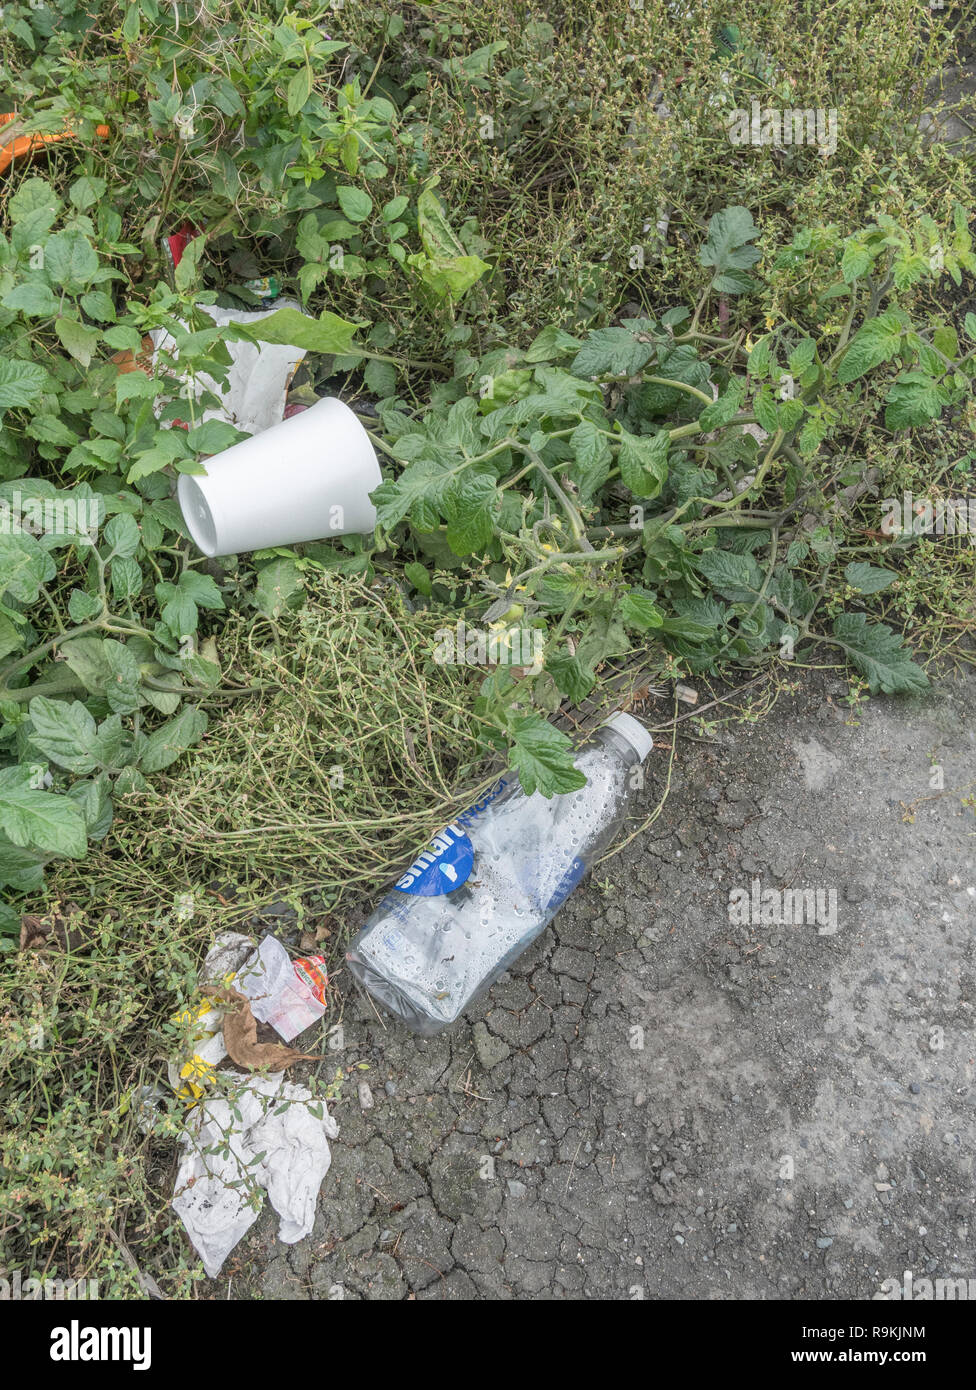 Polystyrene & plastic rubbish discarded in grassy urban back street. For plastic pollution, environmental pollution, war on plastic waste, takeaway. Stock Photo